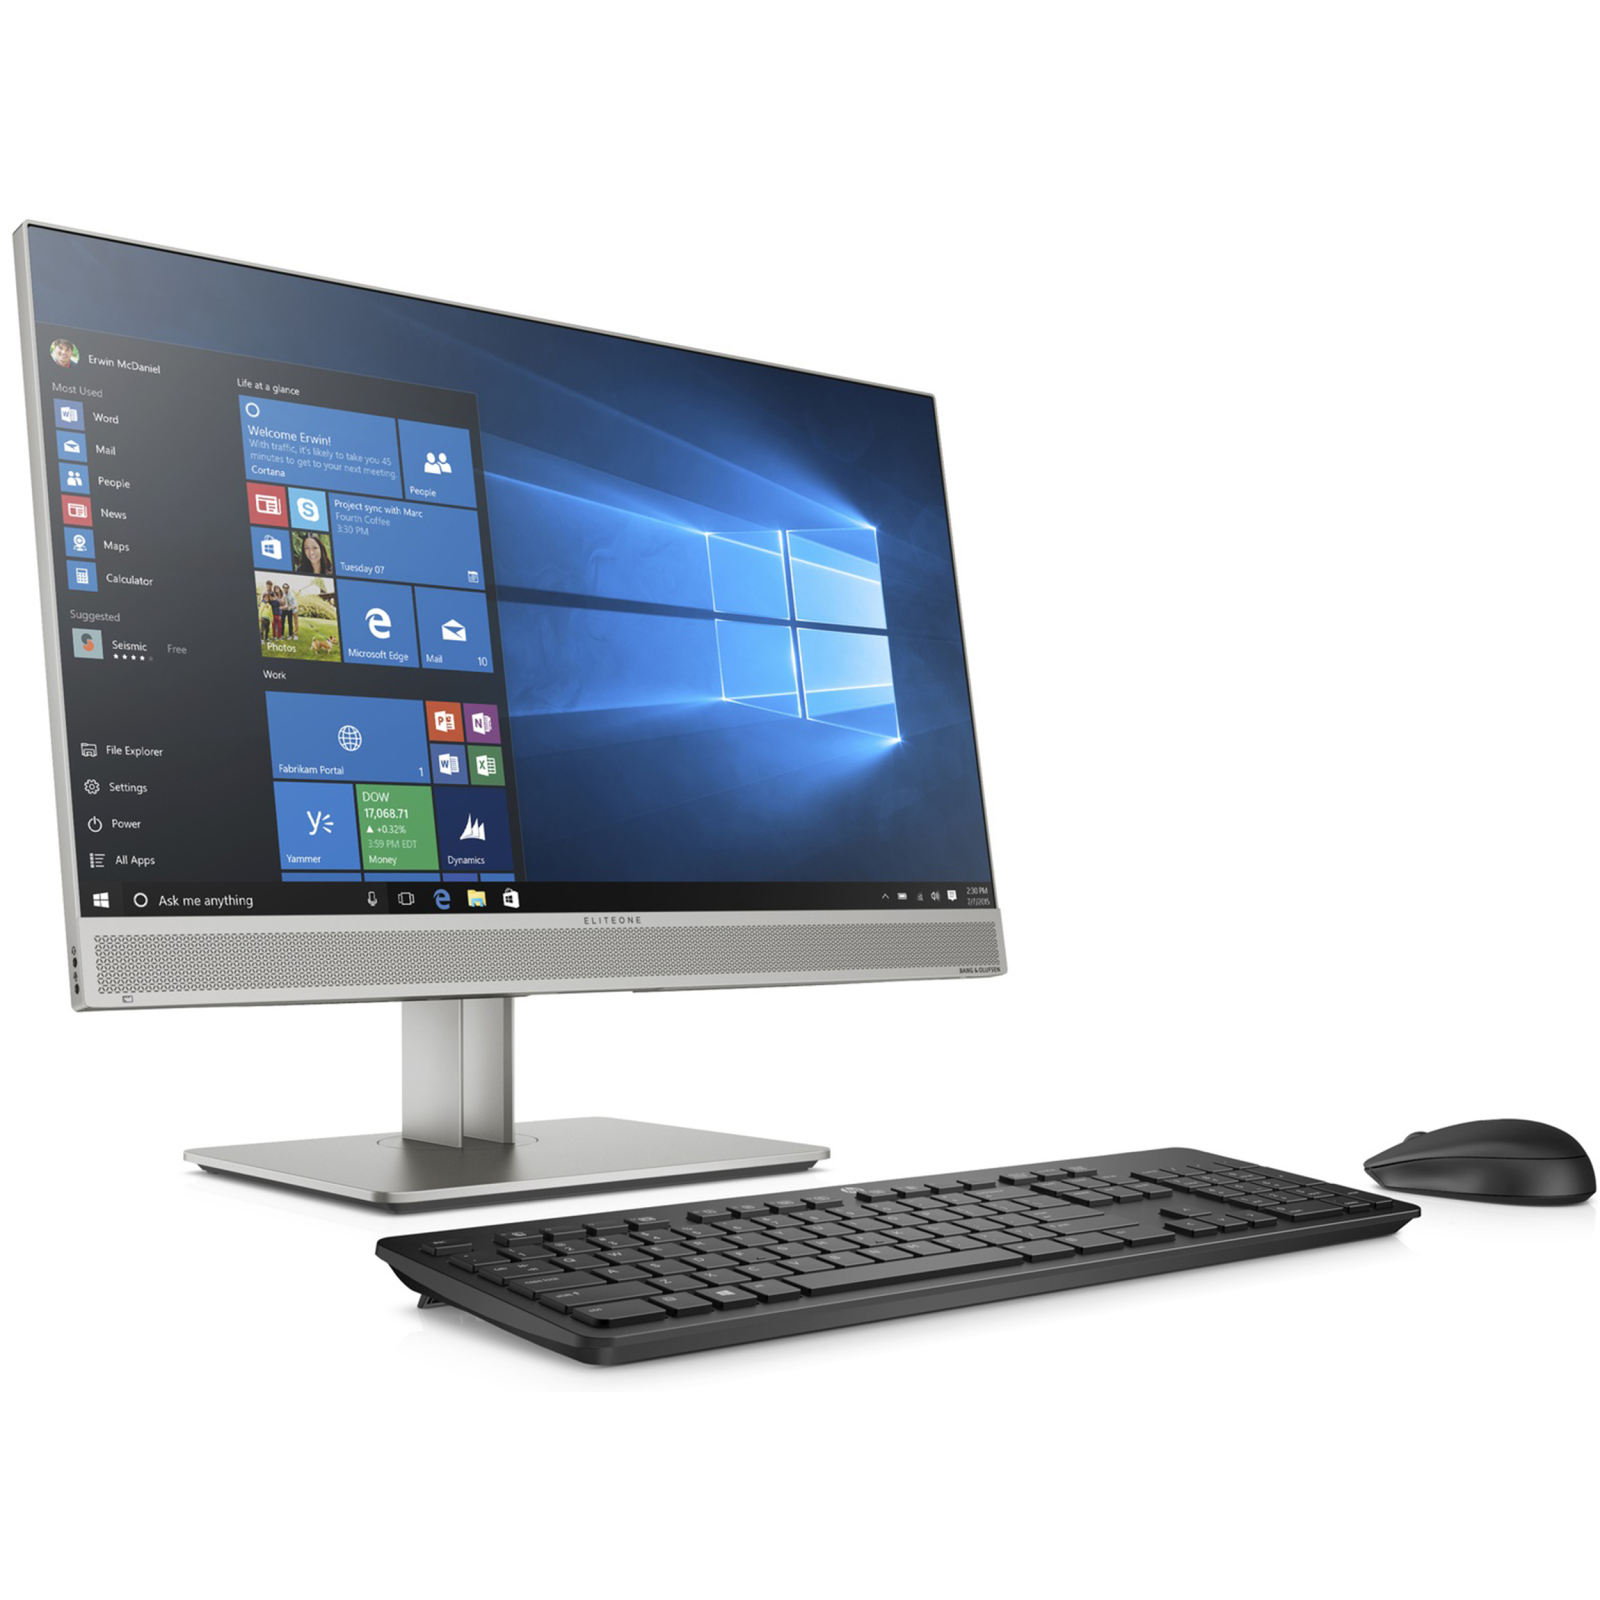  HP G4-Q1 All in One